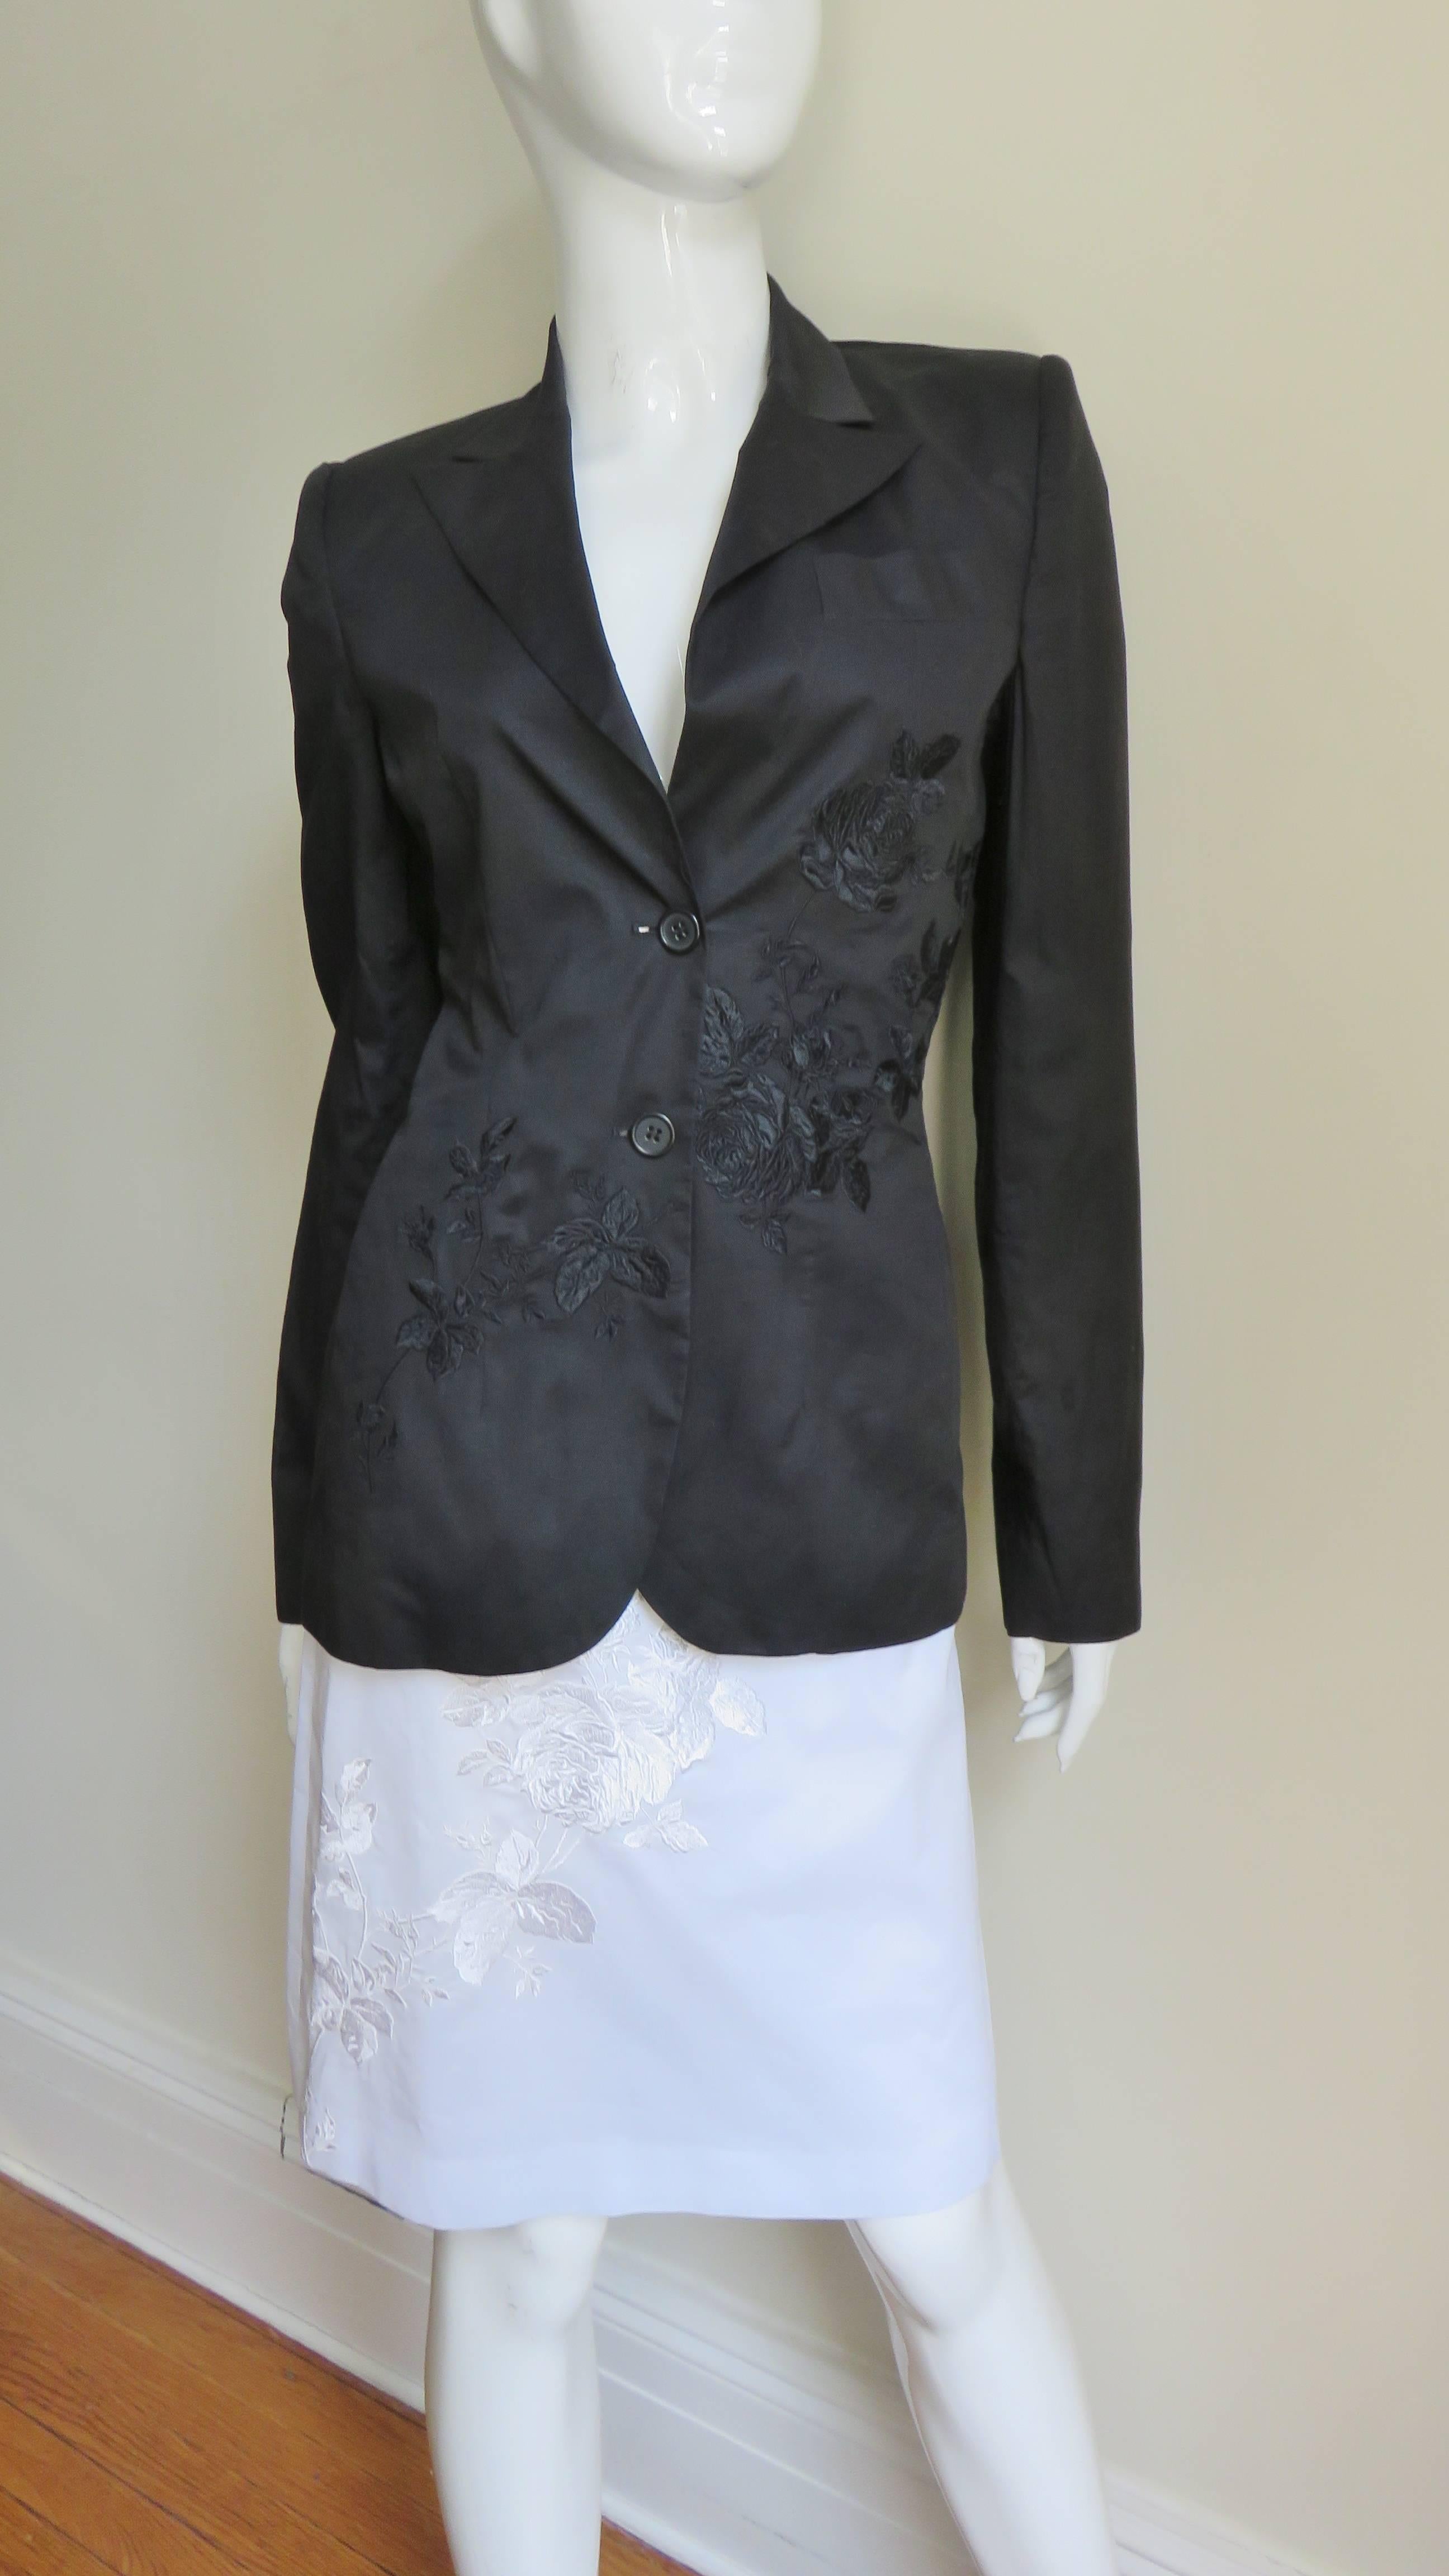 A fabulous silk/linen black skirt suit from Alexander McQueen including an additional matching white skirt.  The jacket has peak lapels, a breast pocket, small shoulder padding, side seam pockets and 2 button front closure. It has intricate flower